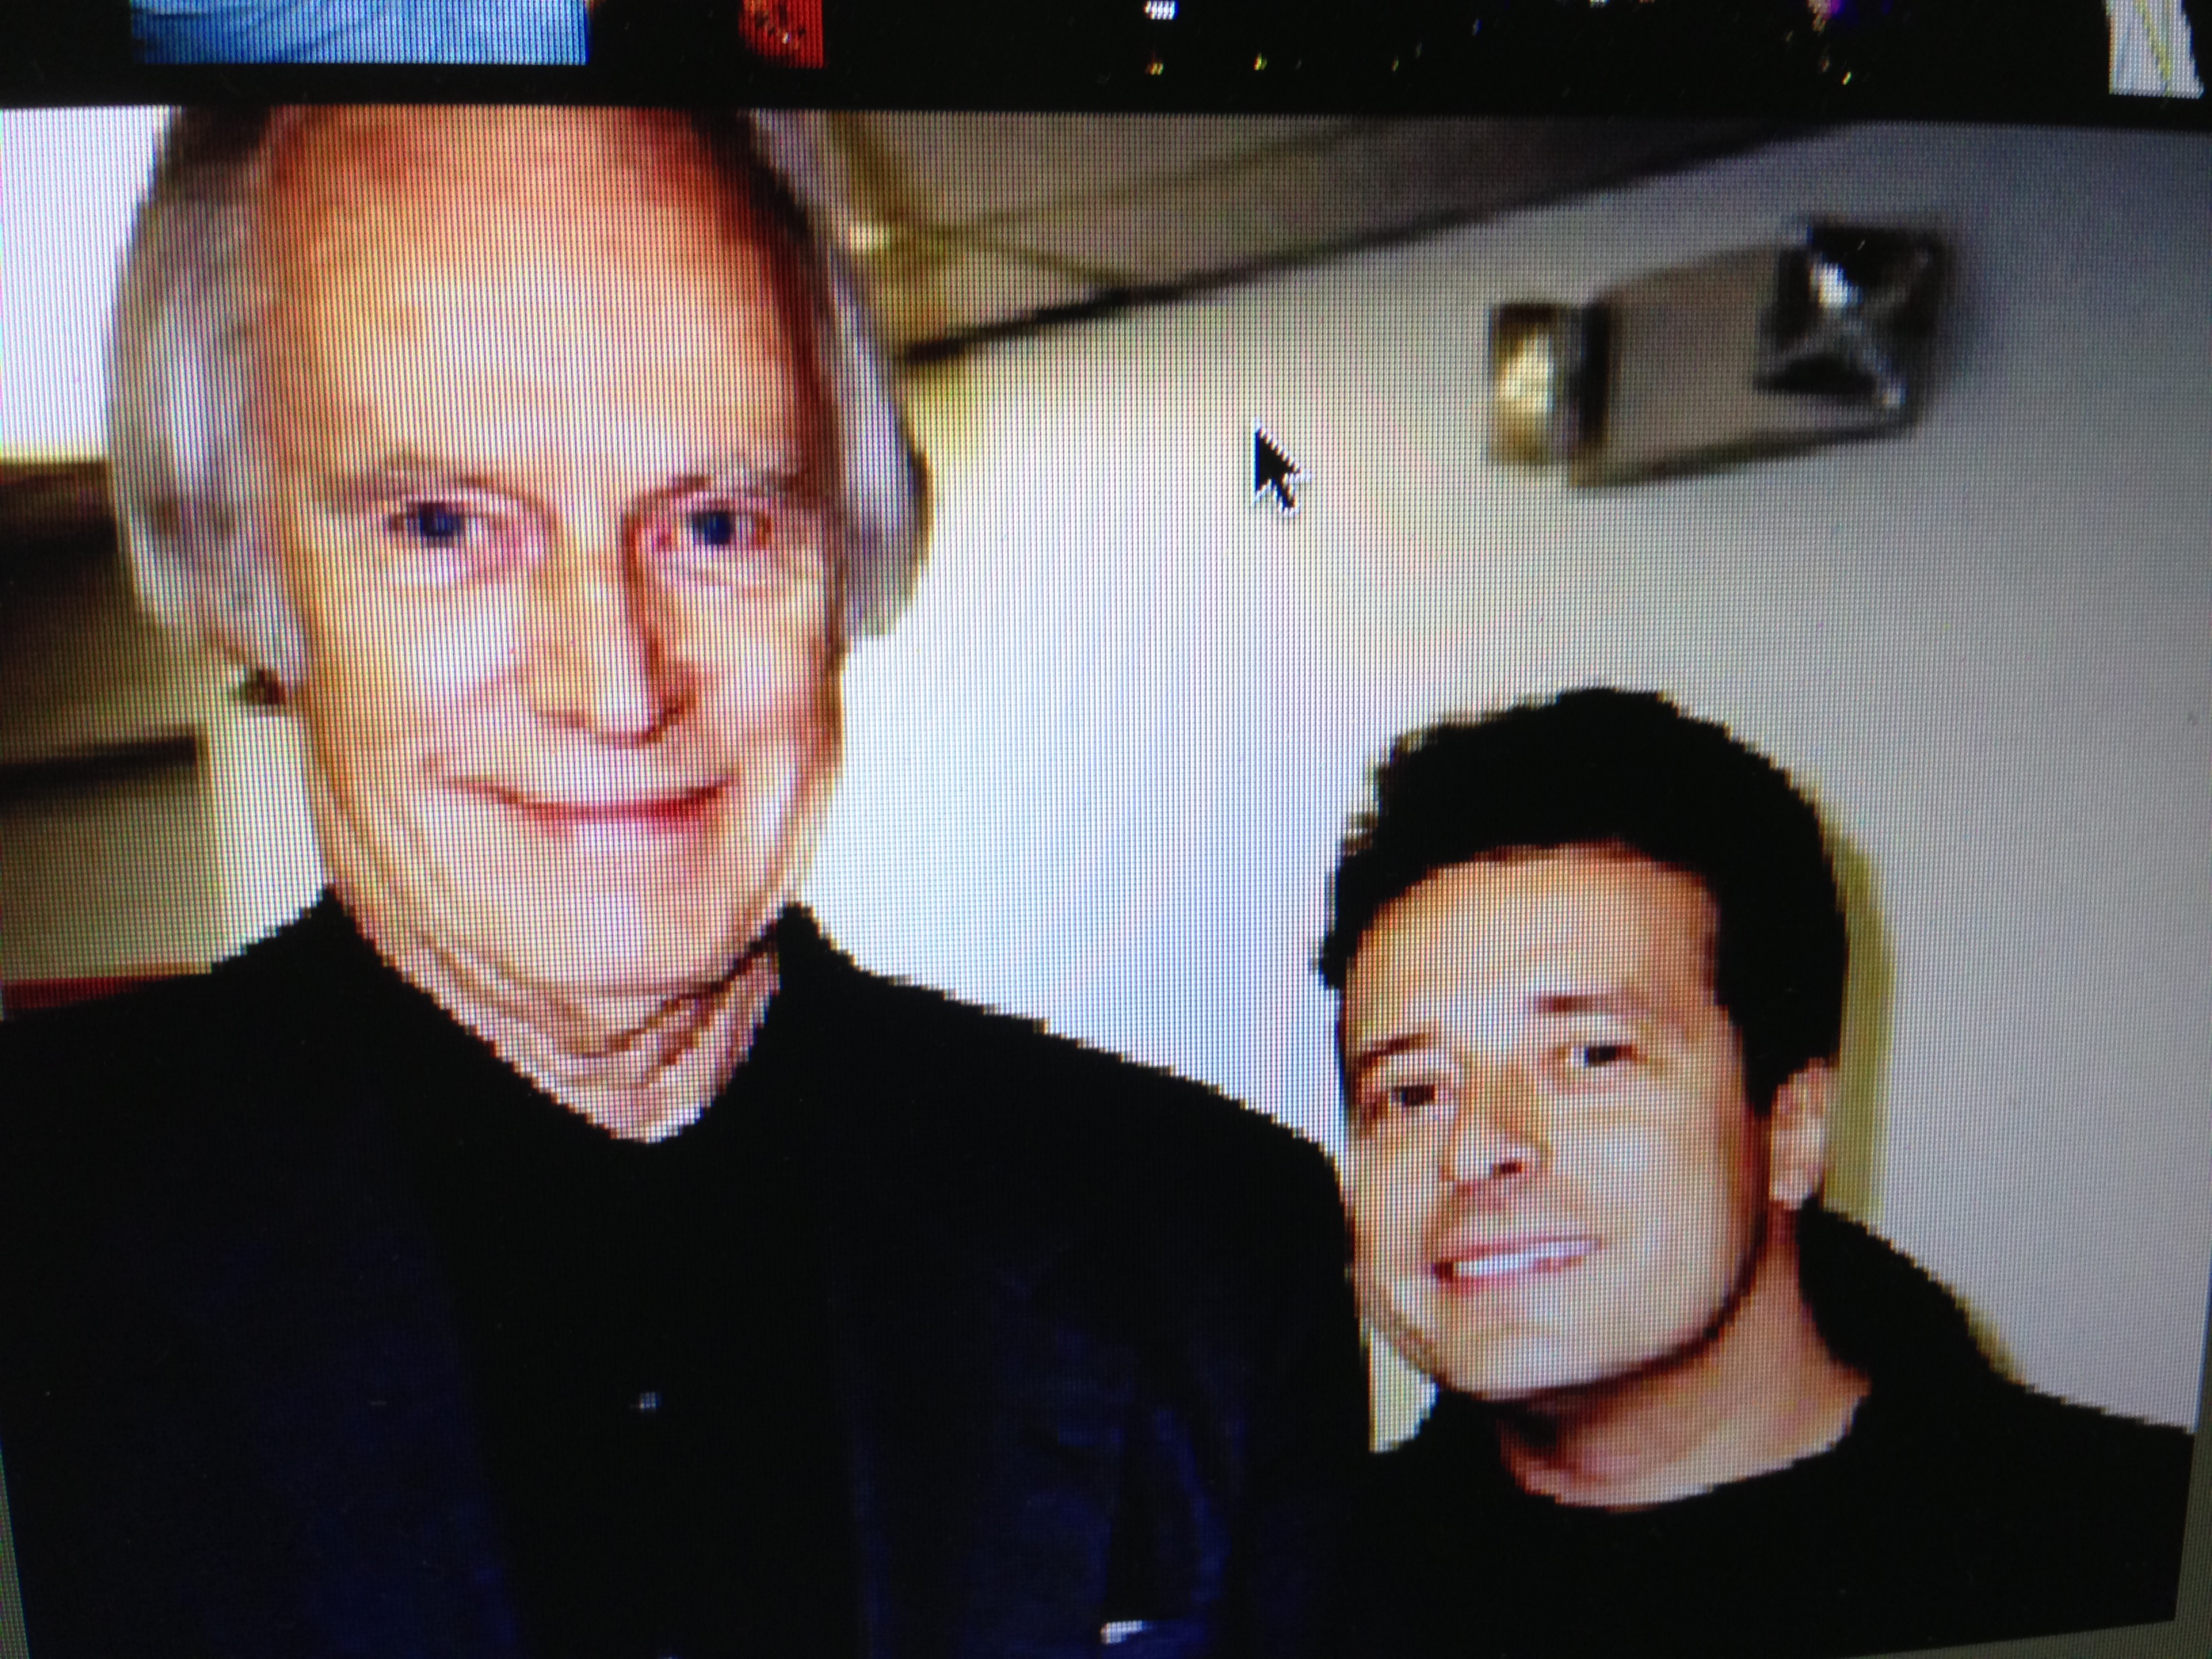 Working with Sir George Martin of the Beatles!